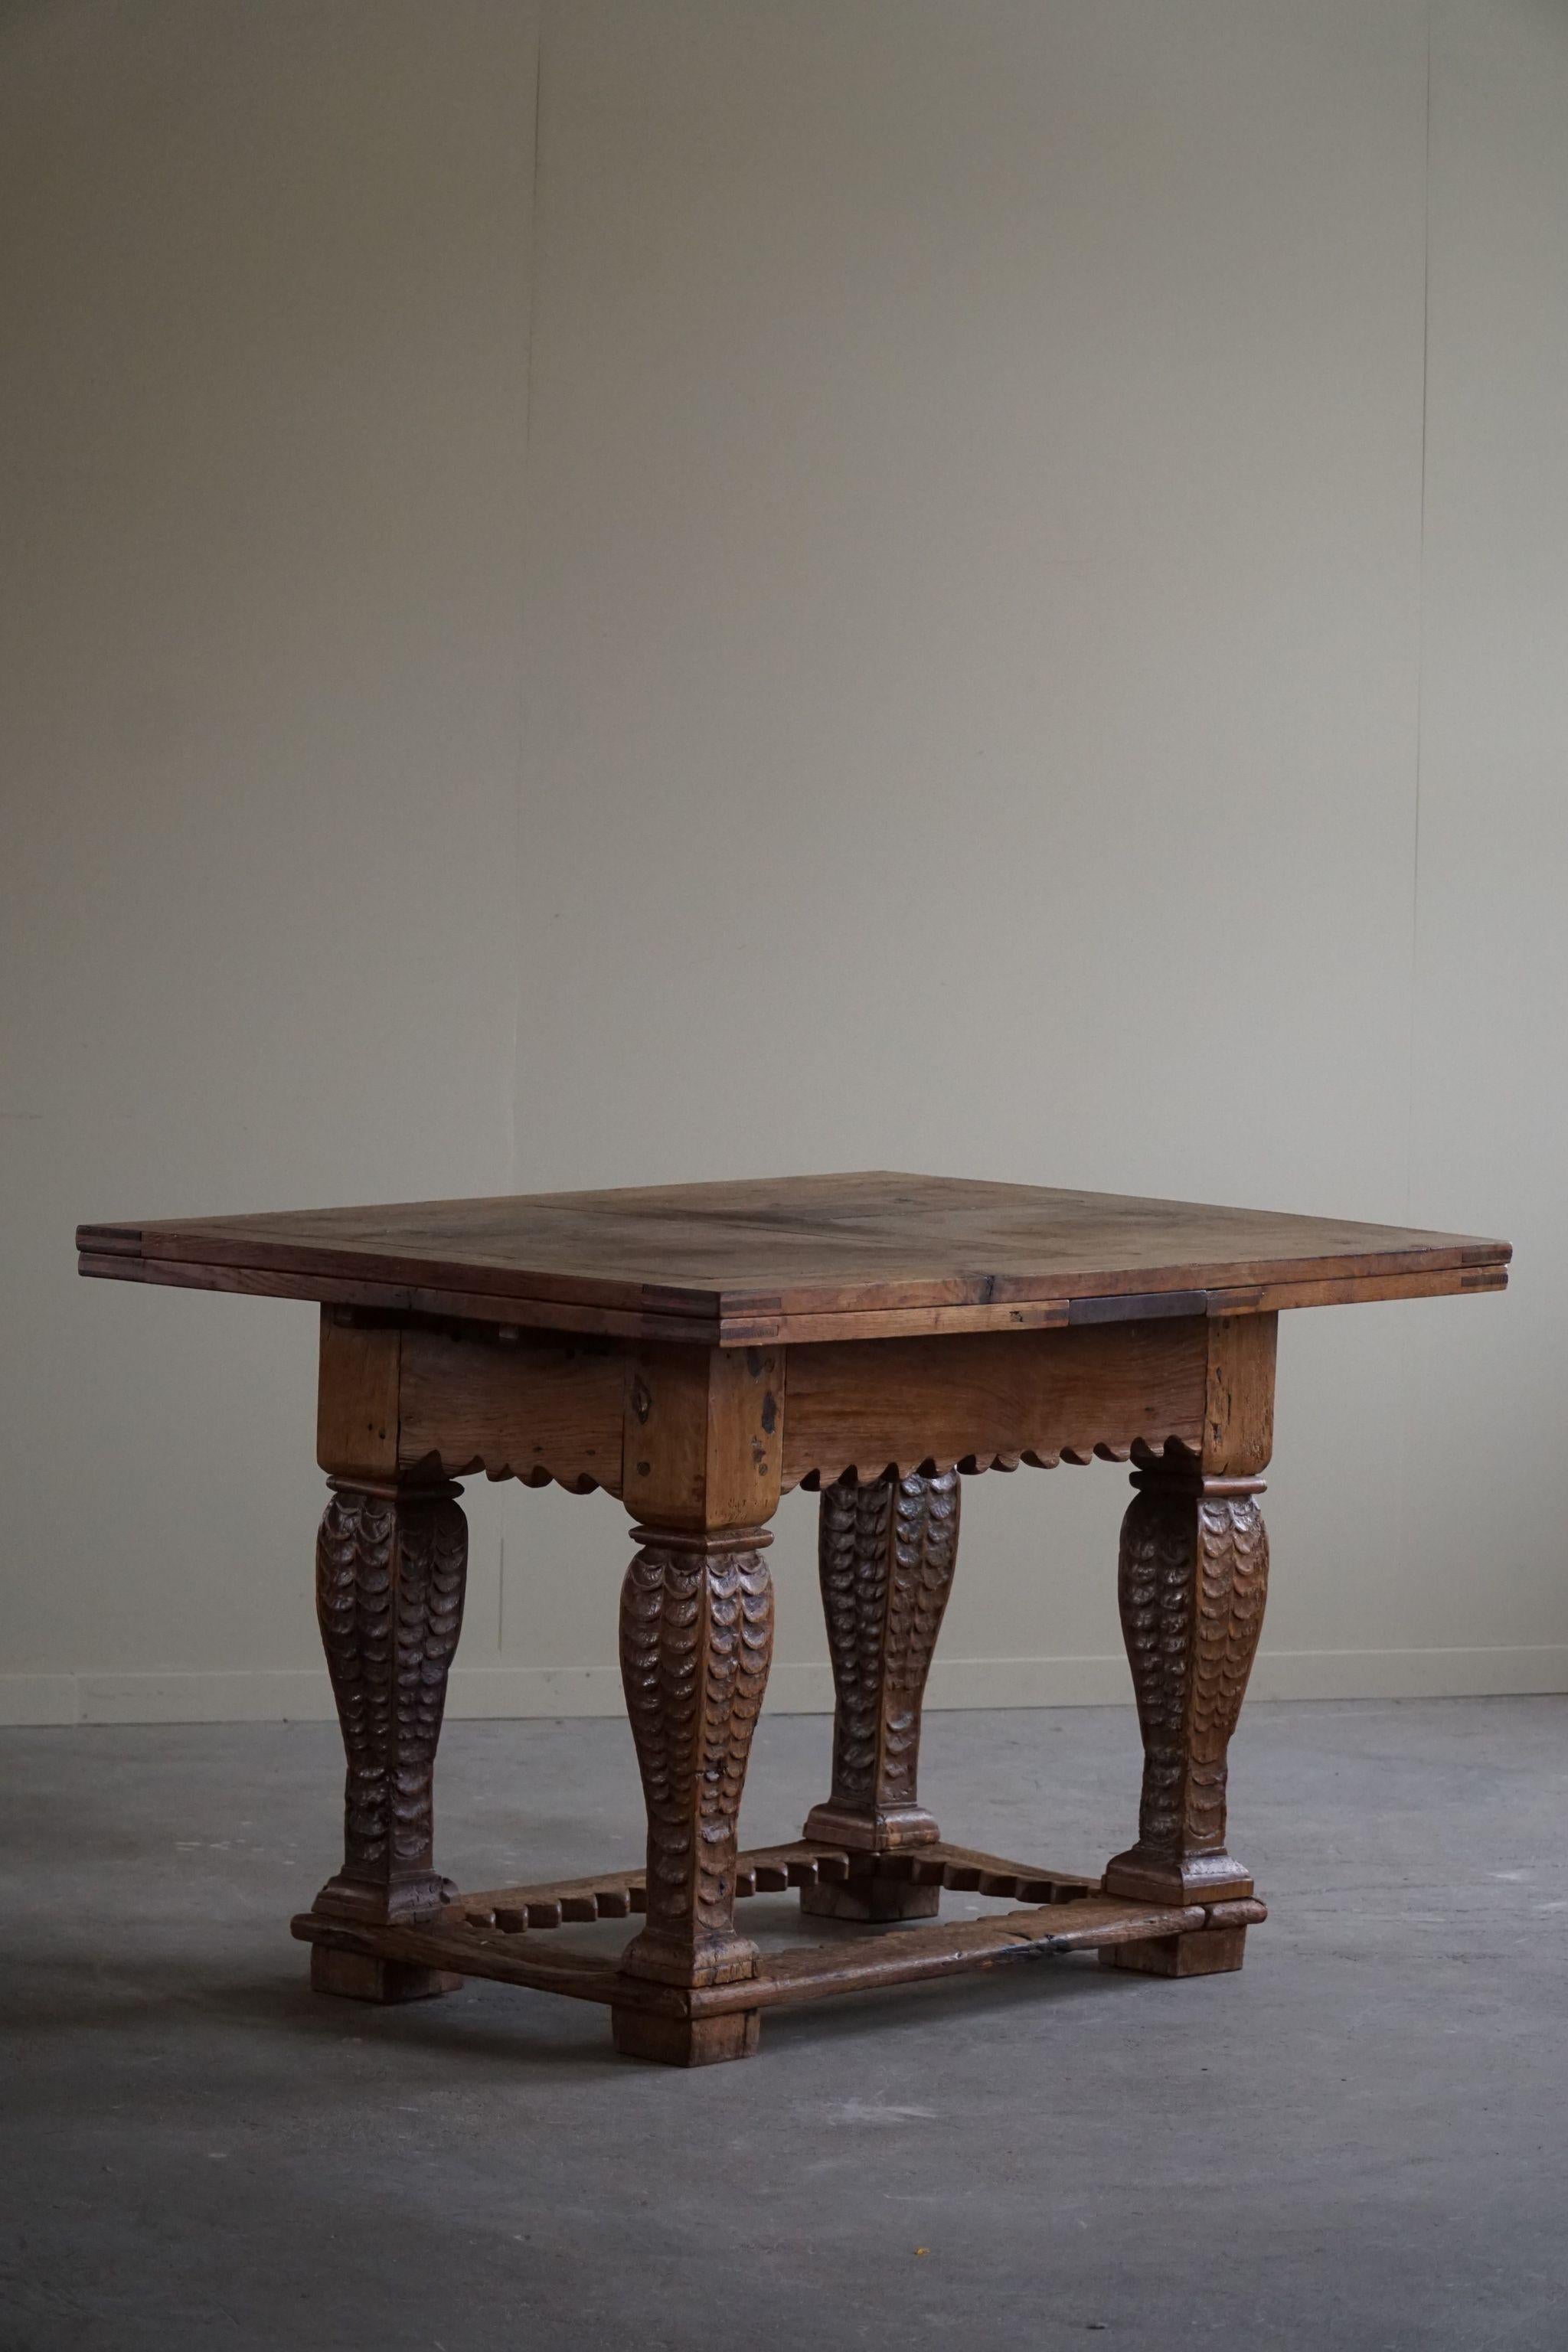 Antique Baroque Dining / Desk Table in Oak, Danish Cabinetmaker, 19th Century  In Fair Condition For Sale In Odense, DK